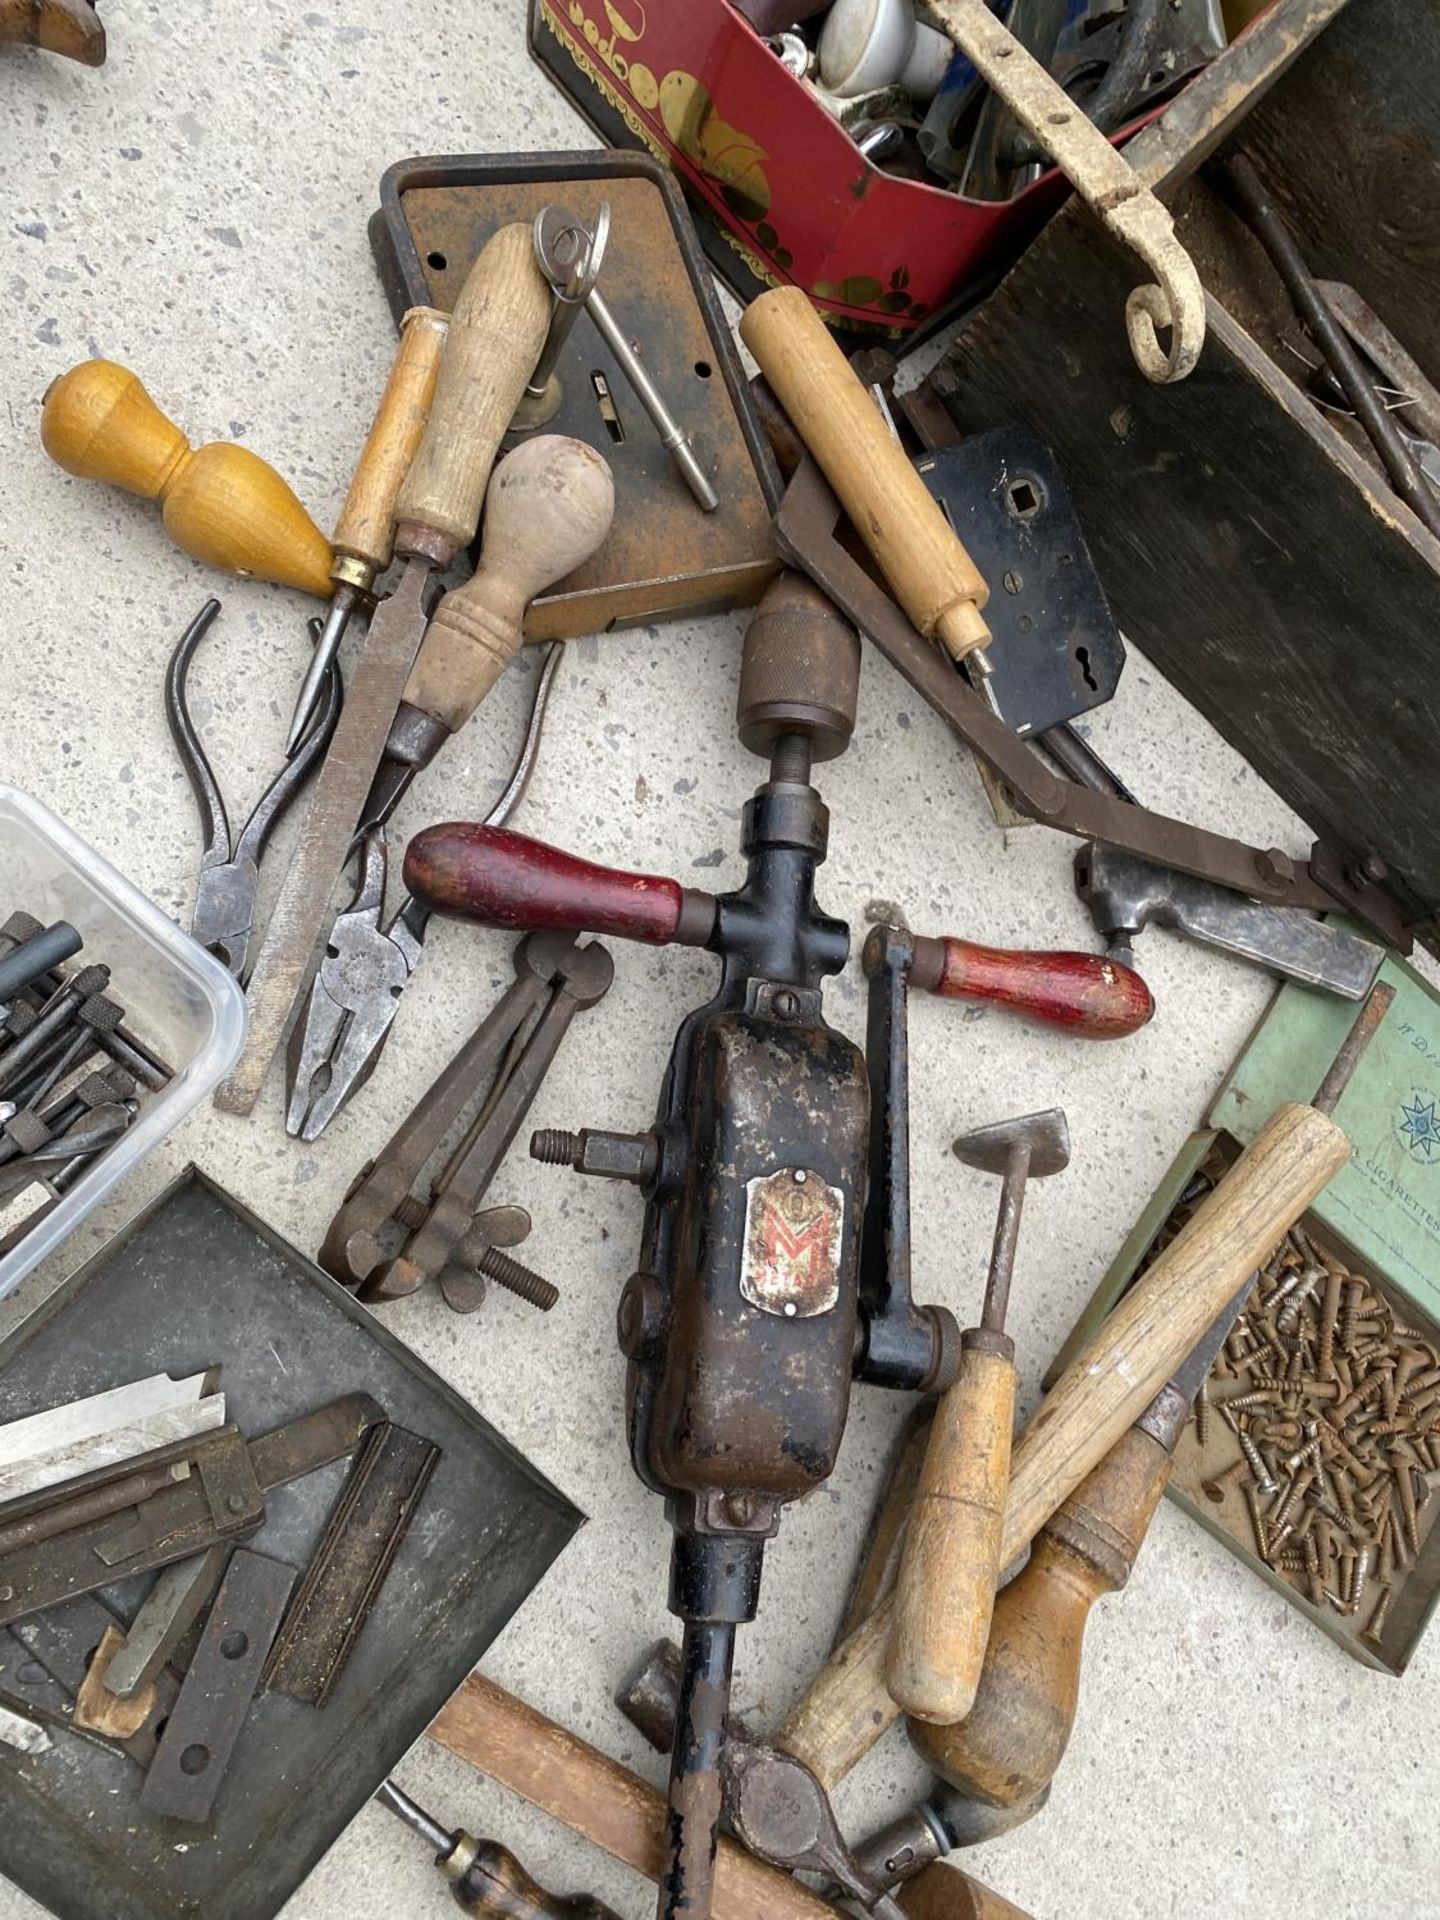 A LARGE ASSORTMENT OF VINTAGE TOOLS TO INCLUDE A BRACE DRILL, A LOCK AND KEY AND A SMALL VICE ETC - Image 3 of 5